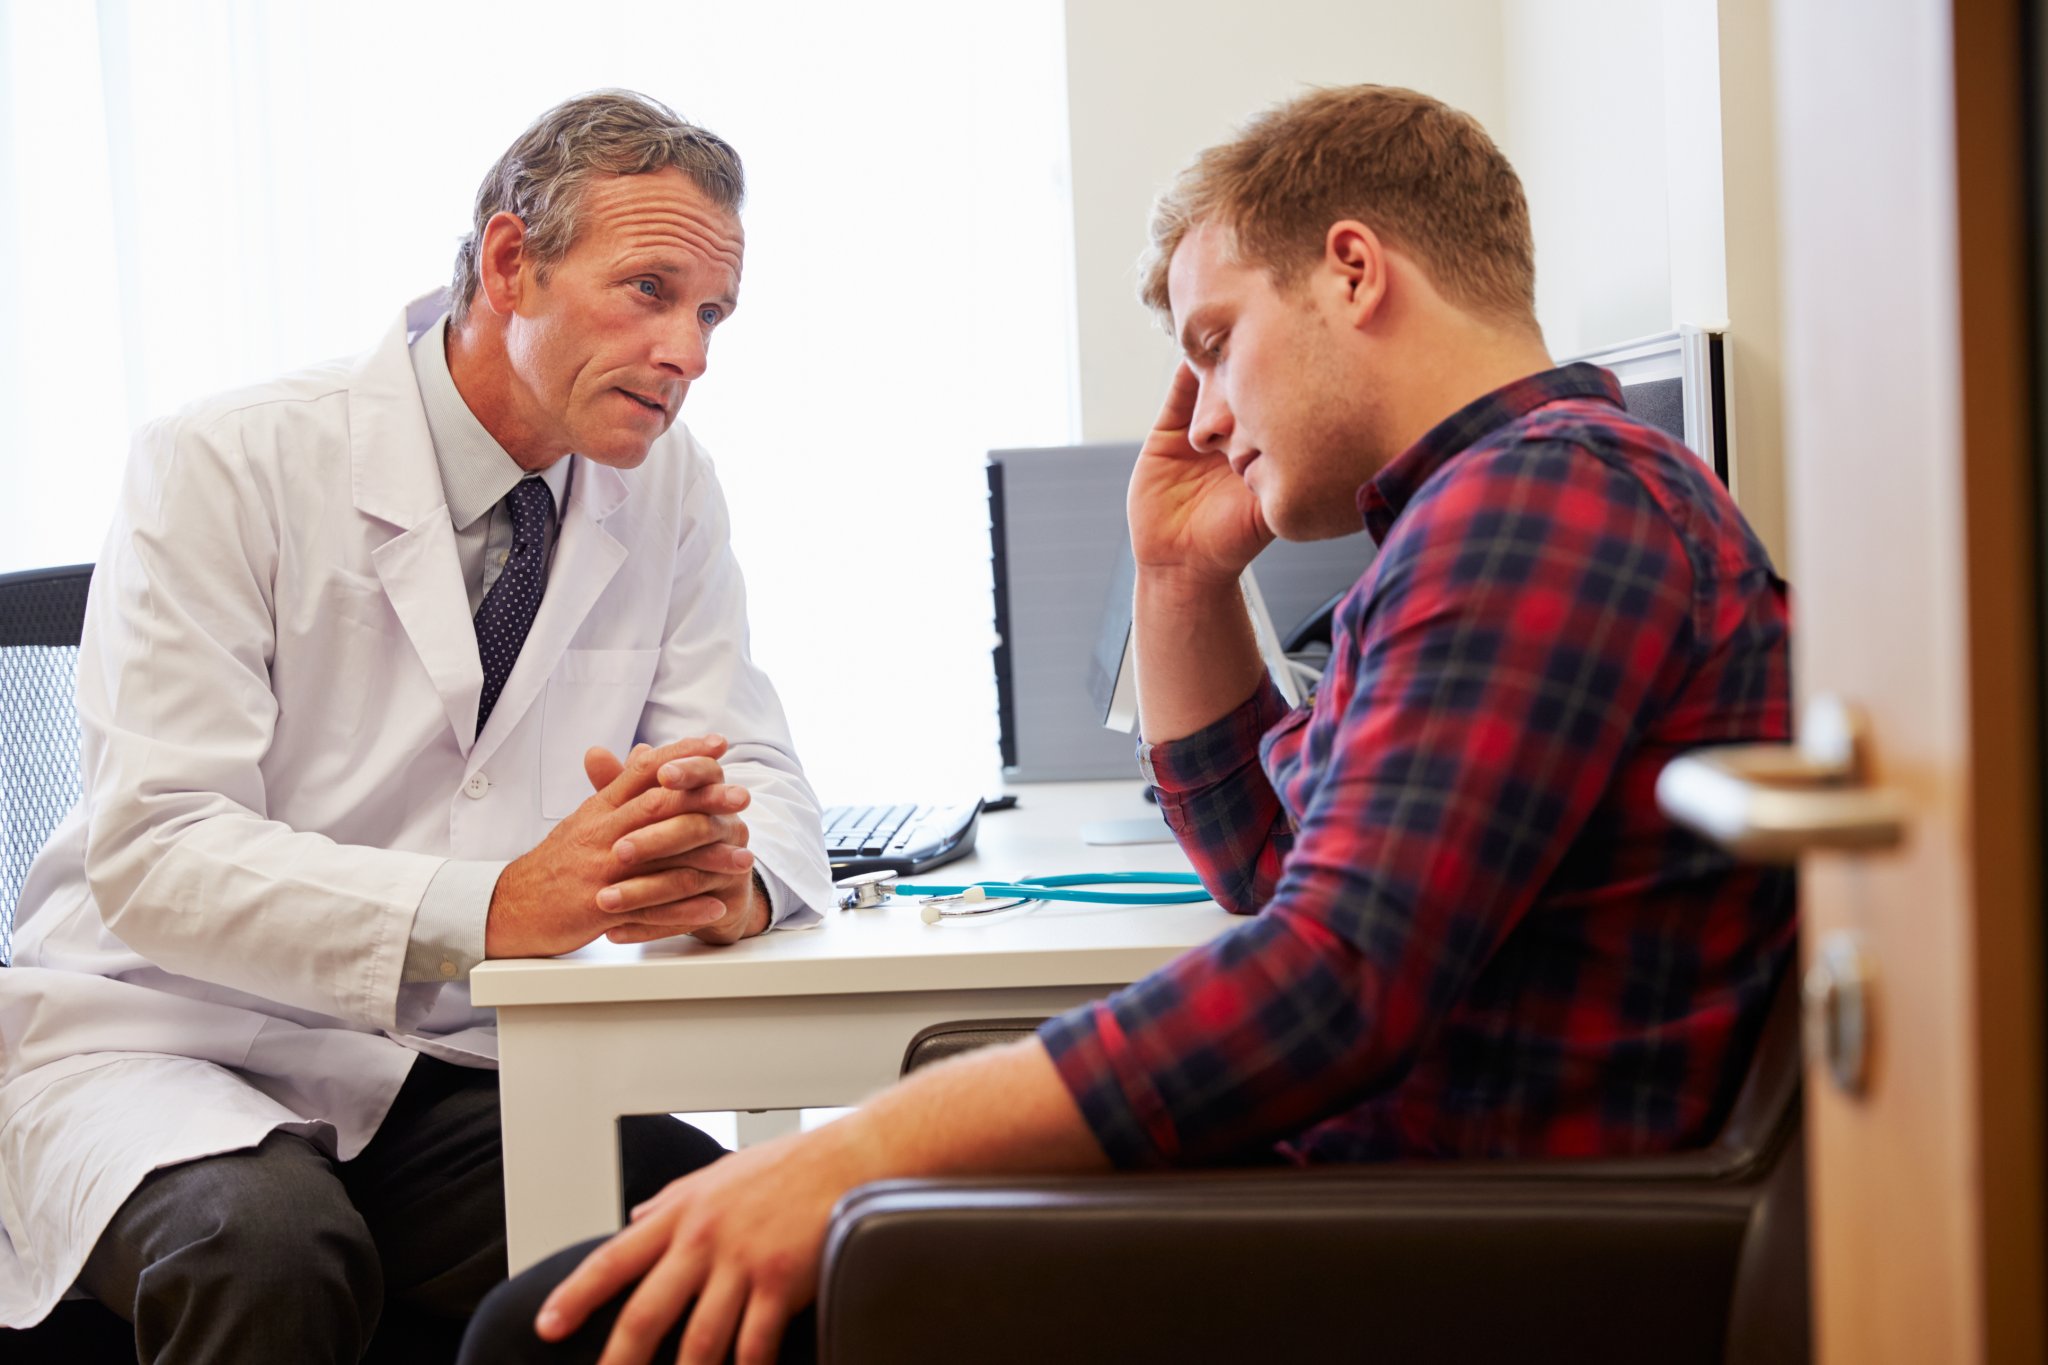 Men Are Still Afraid To Openly Discuss These Five Health Issues